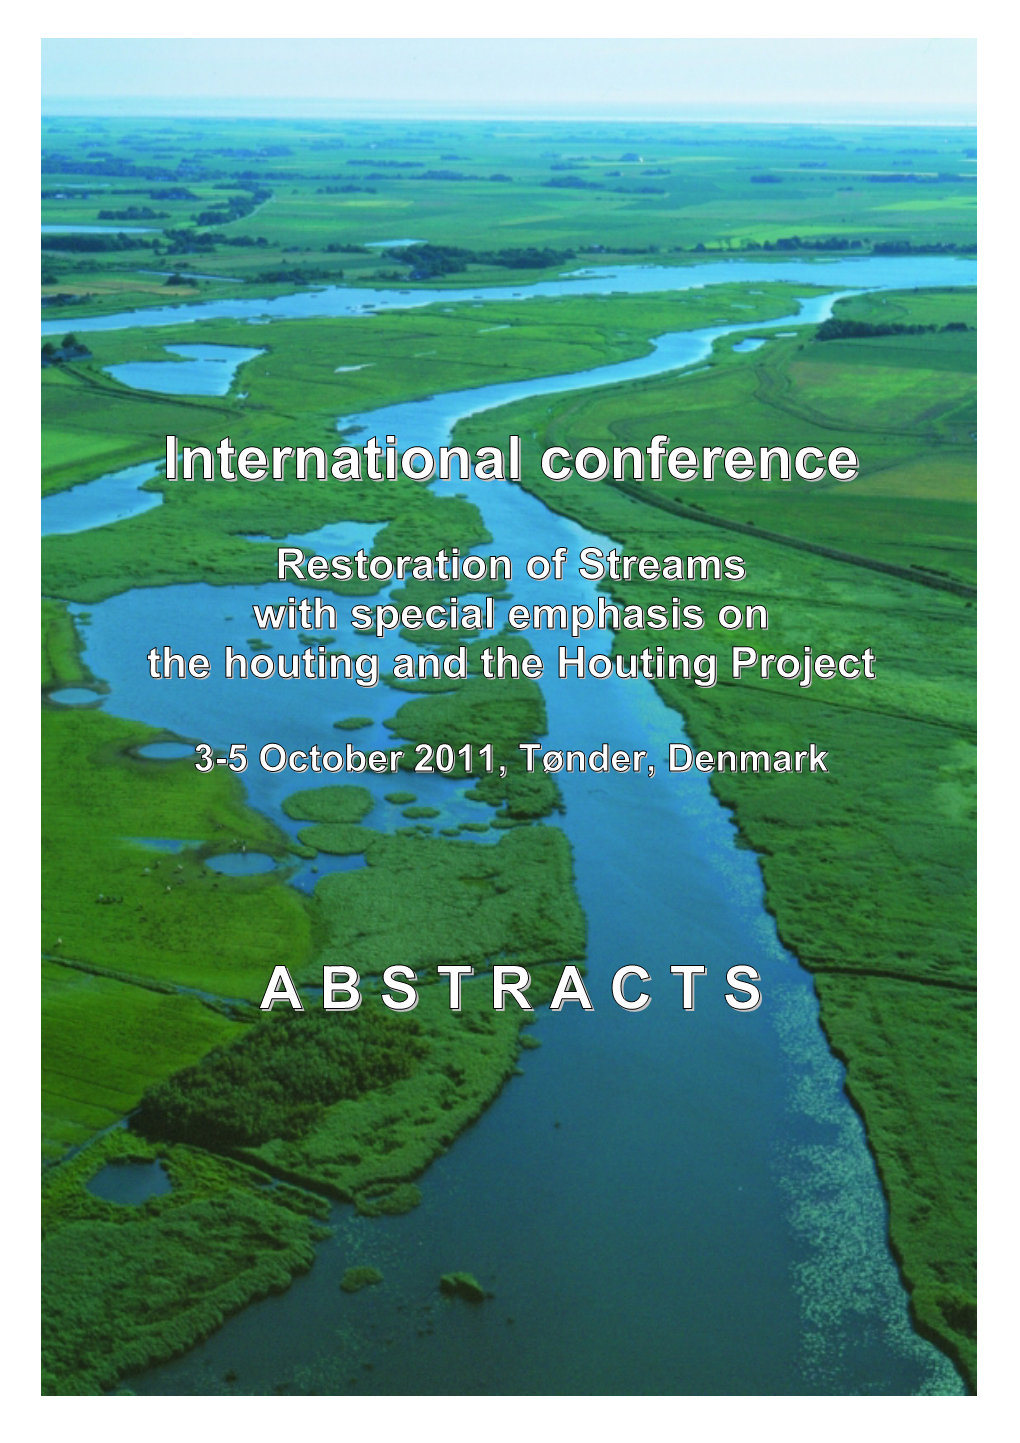 International Conference a B S T R a C